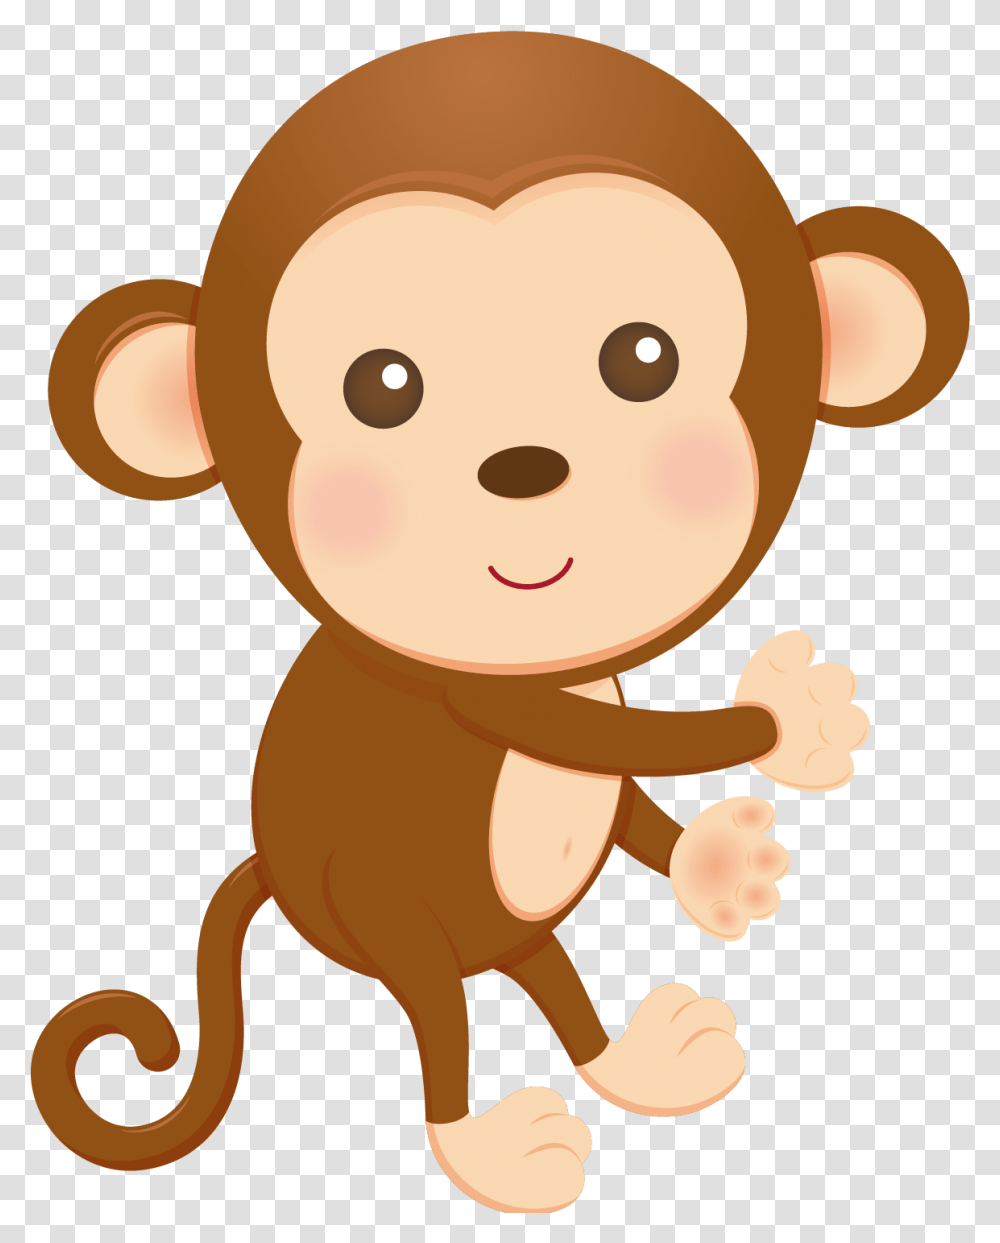 Red Monkey Clip Art At Clker Monkey Clip Art For Kids, Cupid, Toy, Snowman, Winter Transparent Png